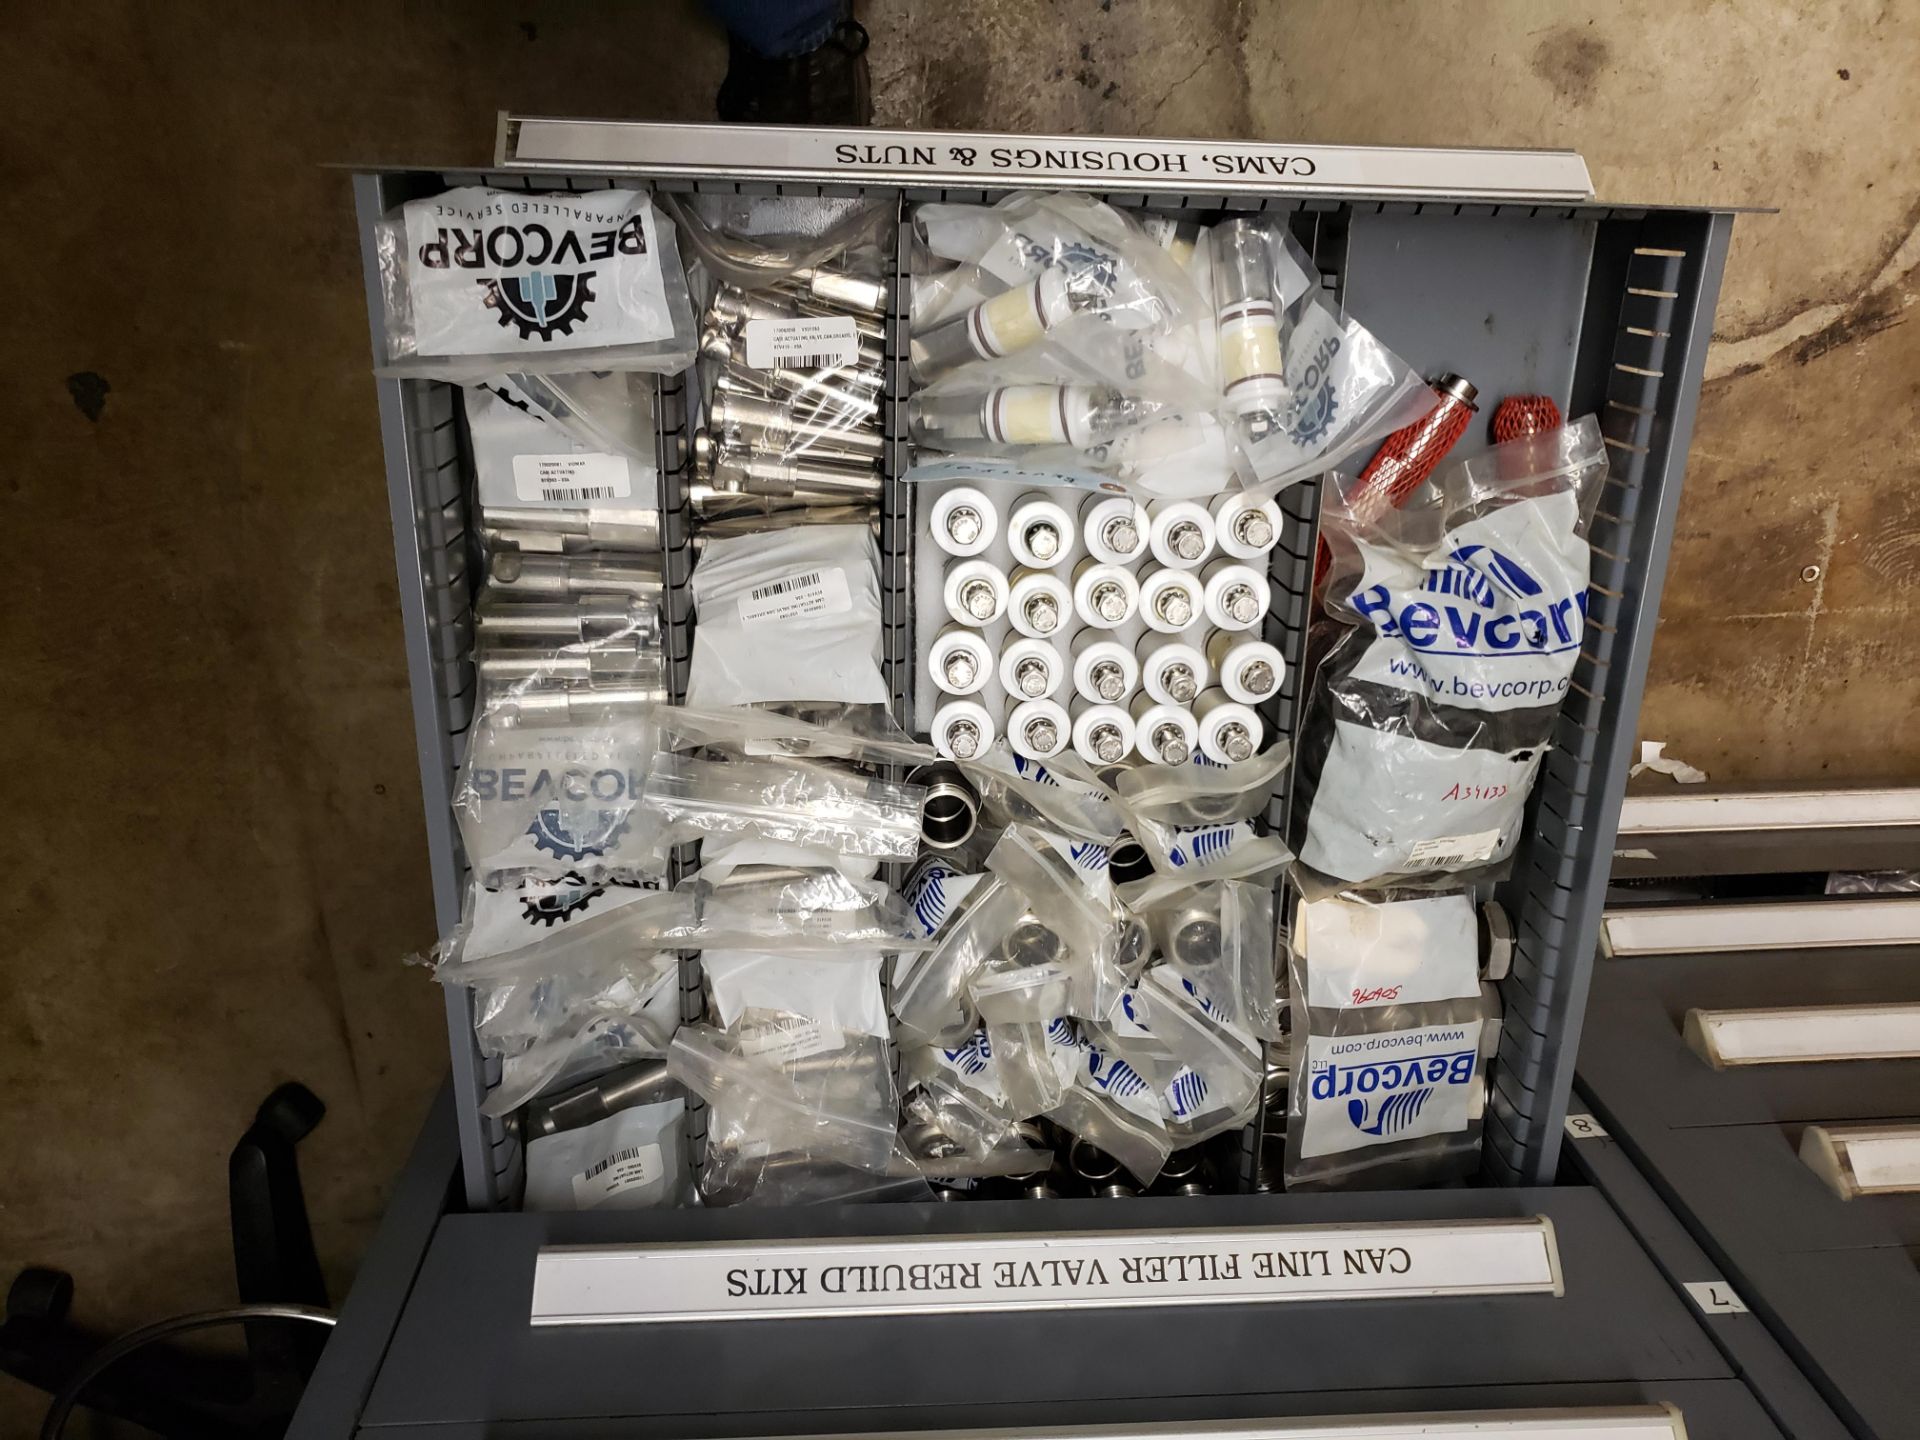 Vidmar 10 Drawer Storage Cabinet, W/ Contents, Bevcorp Filler Nozzle Spare Parts | Rig Fee: $100 - Image 9 of 11